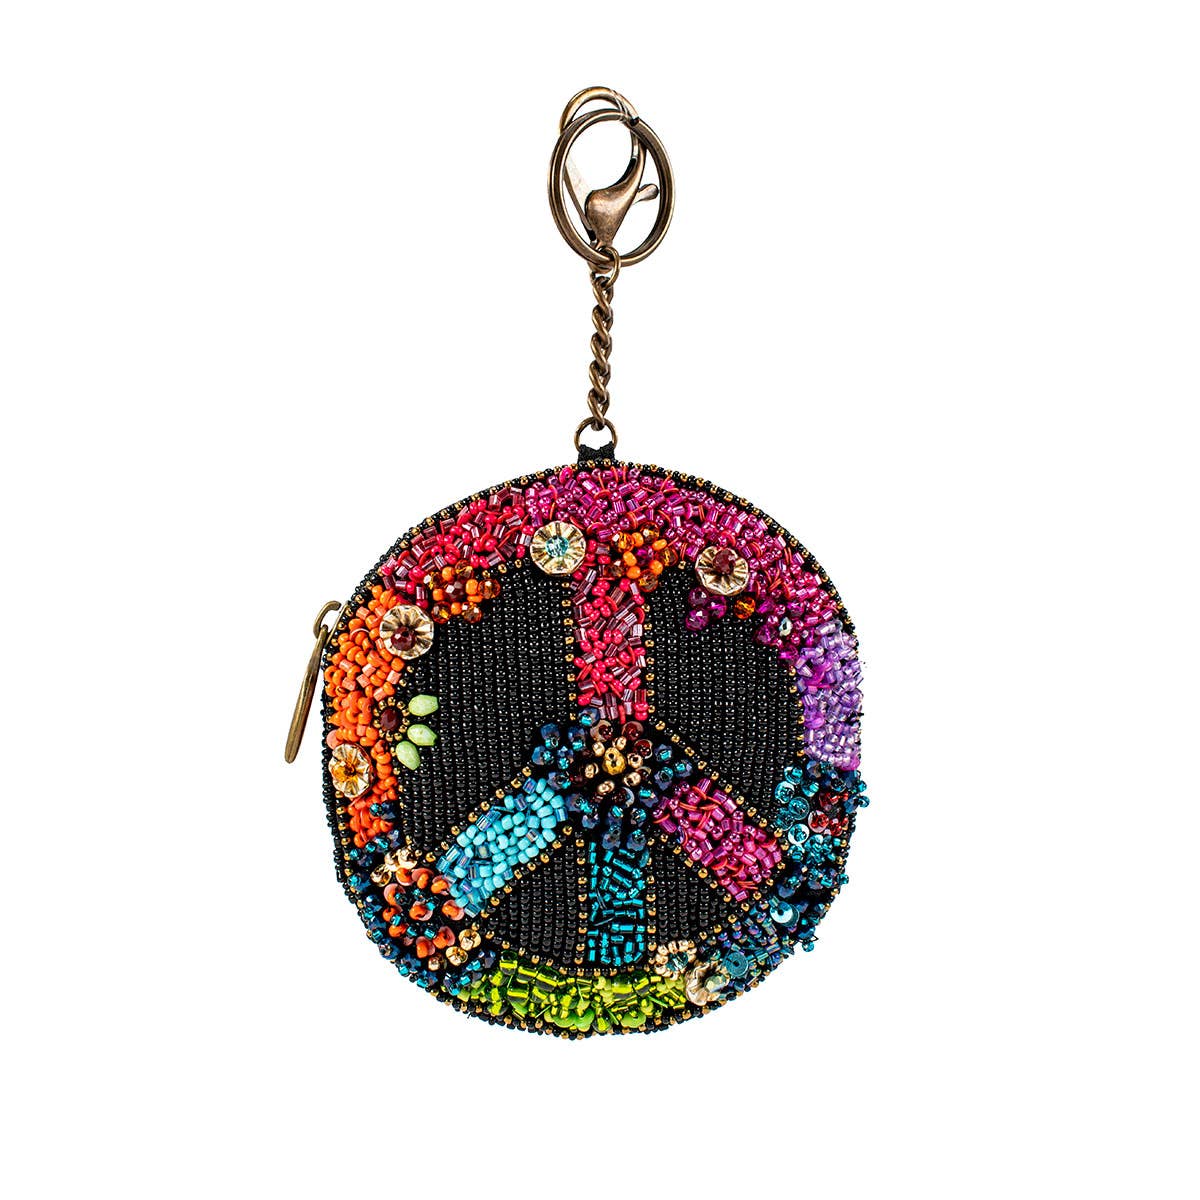 Mary Frances Accessories - Make Peace Coin Purse/Key Fob